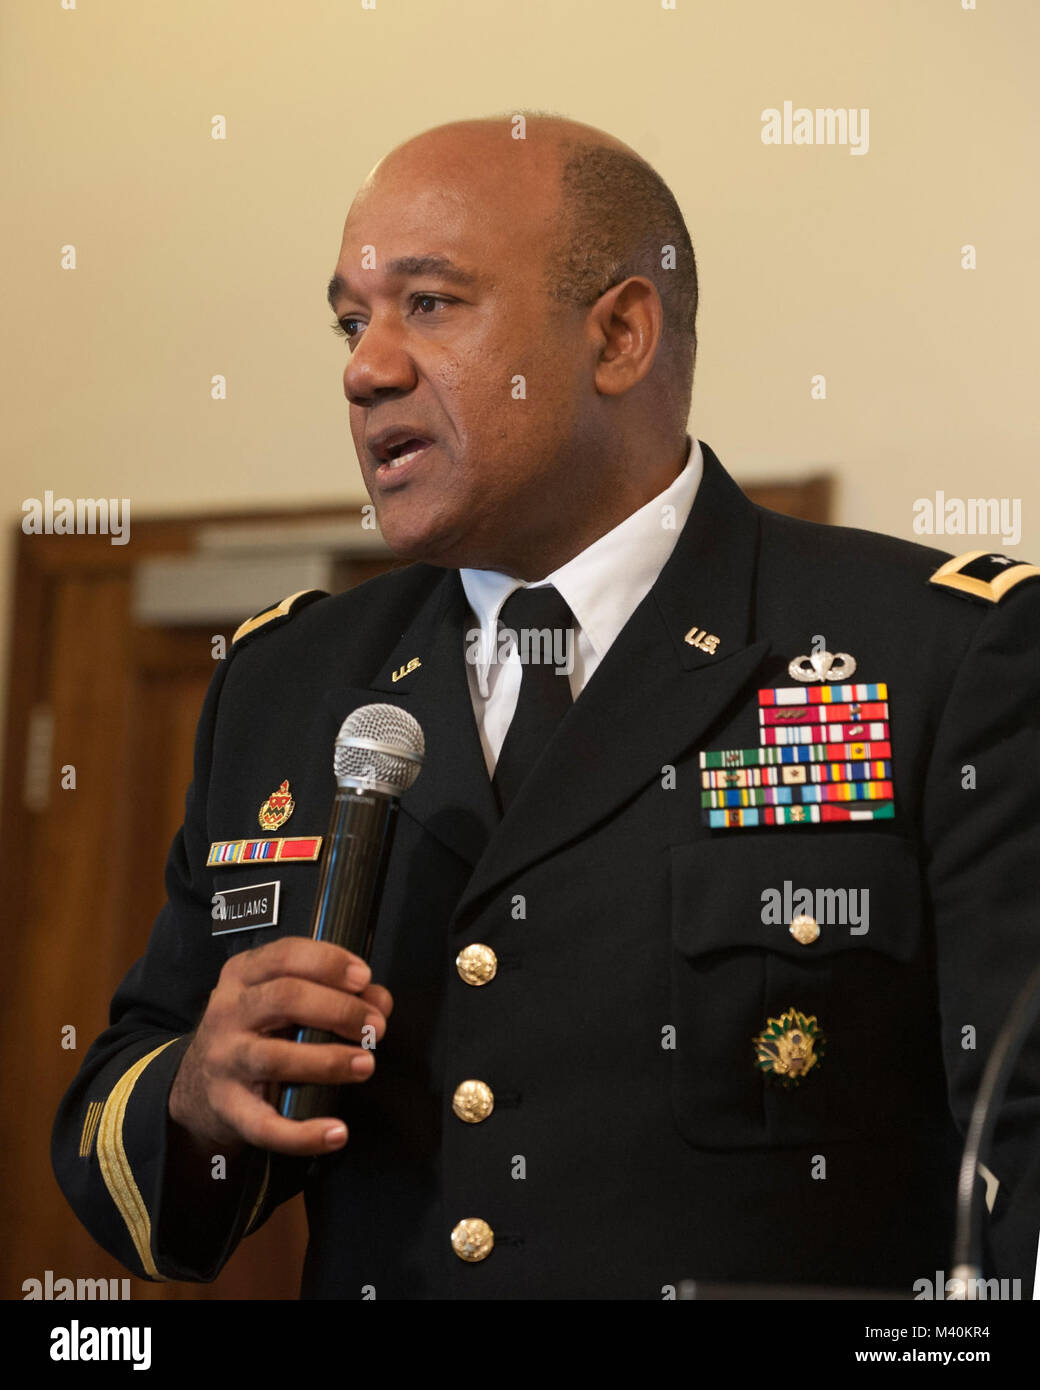 U.S. Army Maj. Gen. Darryl Williams, the commander of U.S. Army Africa (USARAF), speaks with representatives from sixteen African nations during the 2015 Gender Mainstreaming Seminar in Tanzania, Africa on May 19. USARAF co-hosted the conference, alongside the Tanzanian Peoples Defense Force, in an effort to frame the importance of gender mainstreaming and promote equality throughout the region. (DoD News photo by Staff Sgt. Brian Kimball) 150519-F-QP401-103 by DoD News Photos Stock Photo